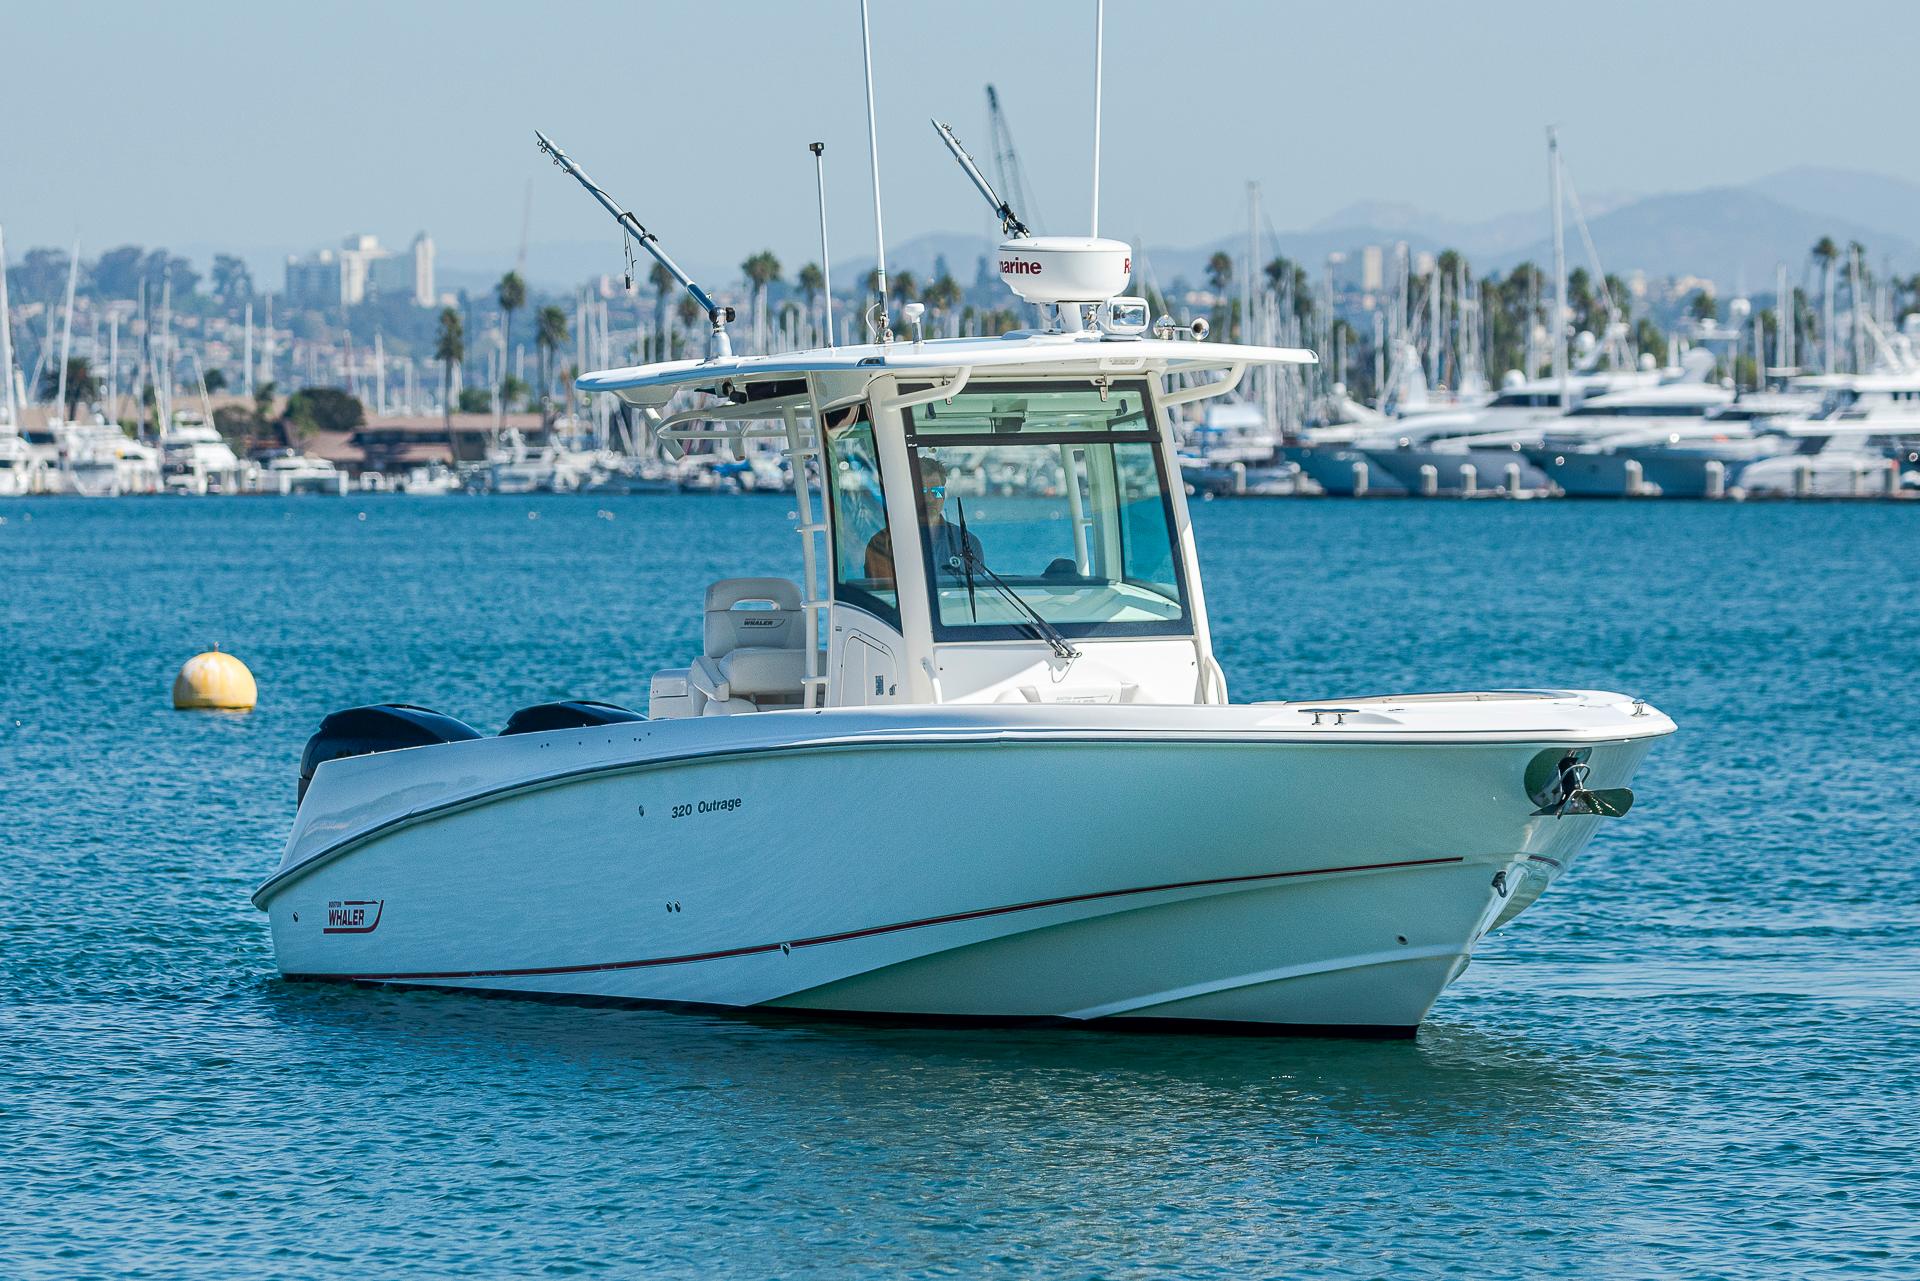 Fishing Boats for sale in California - Boat Trader